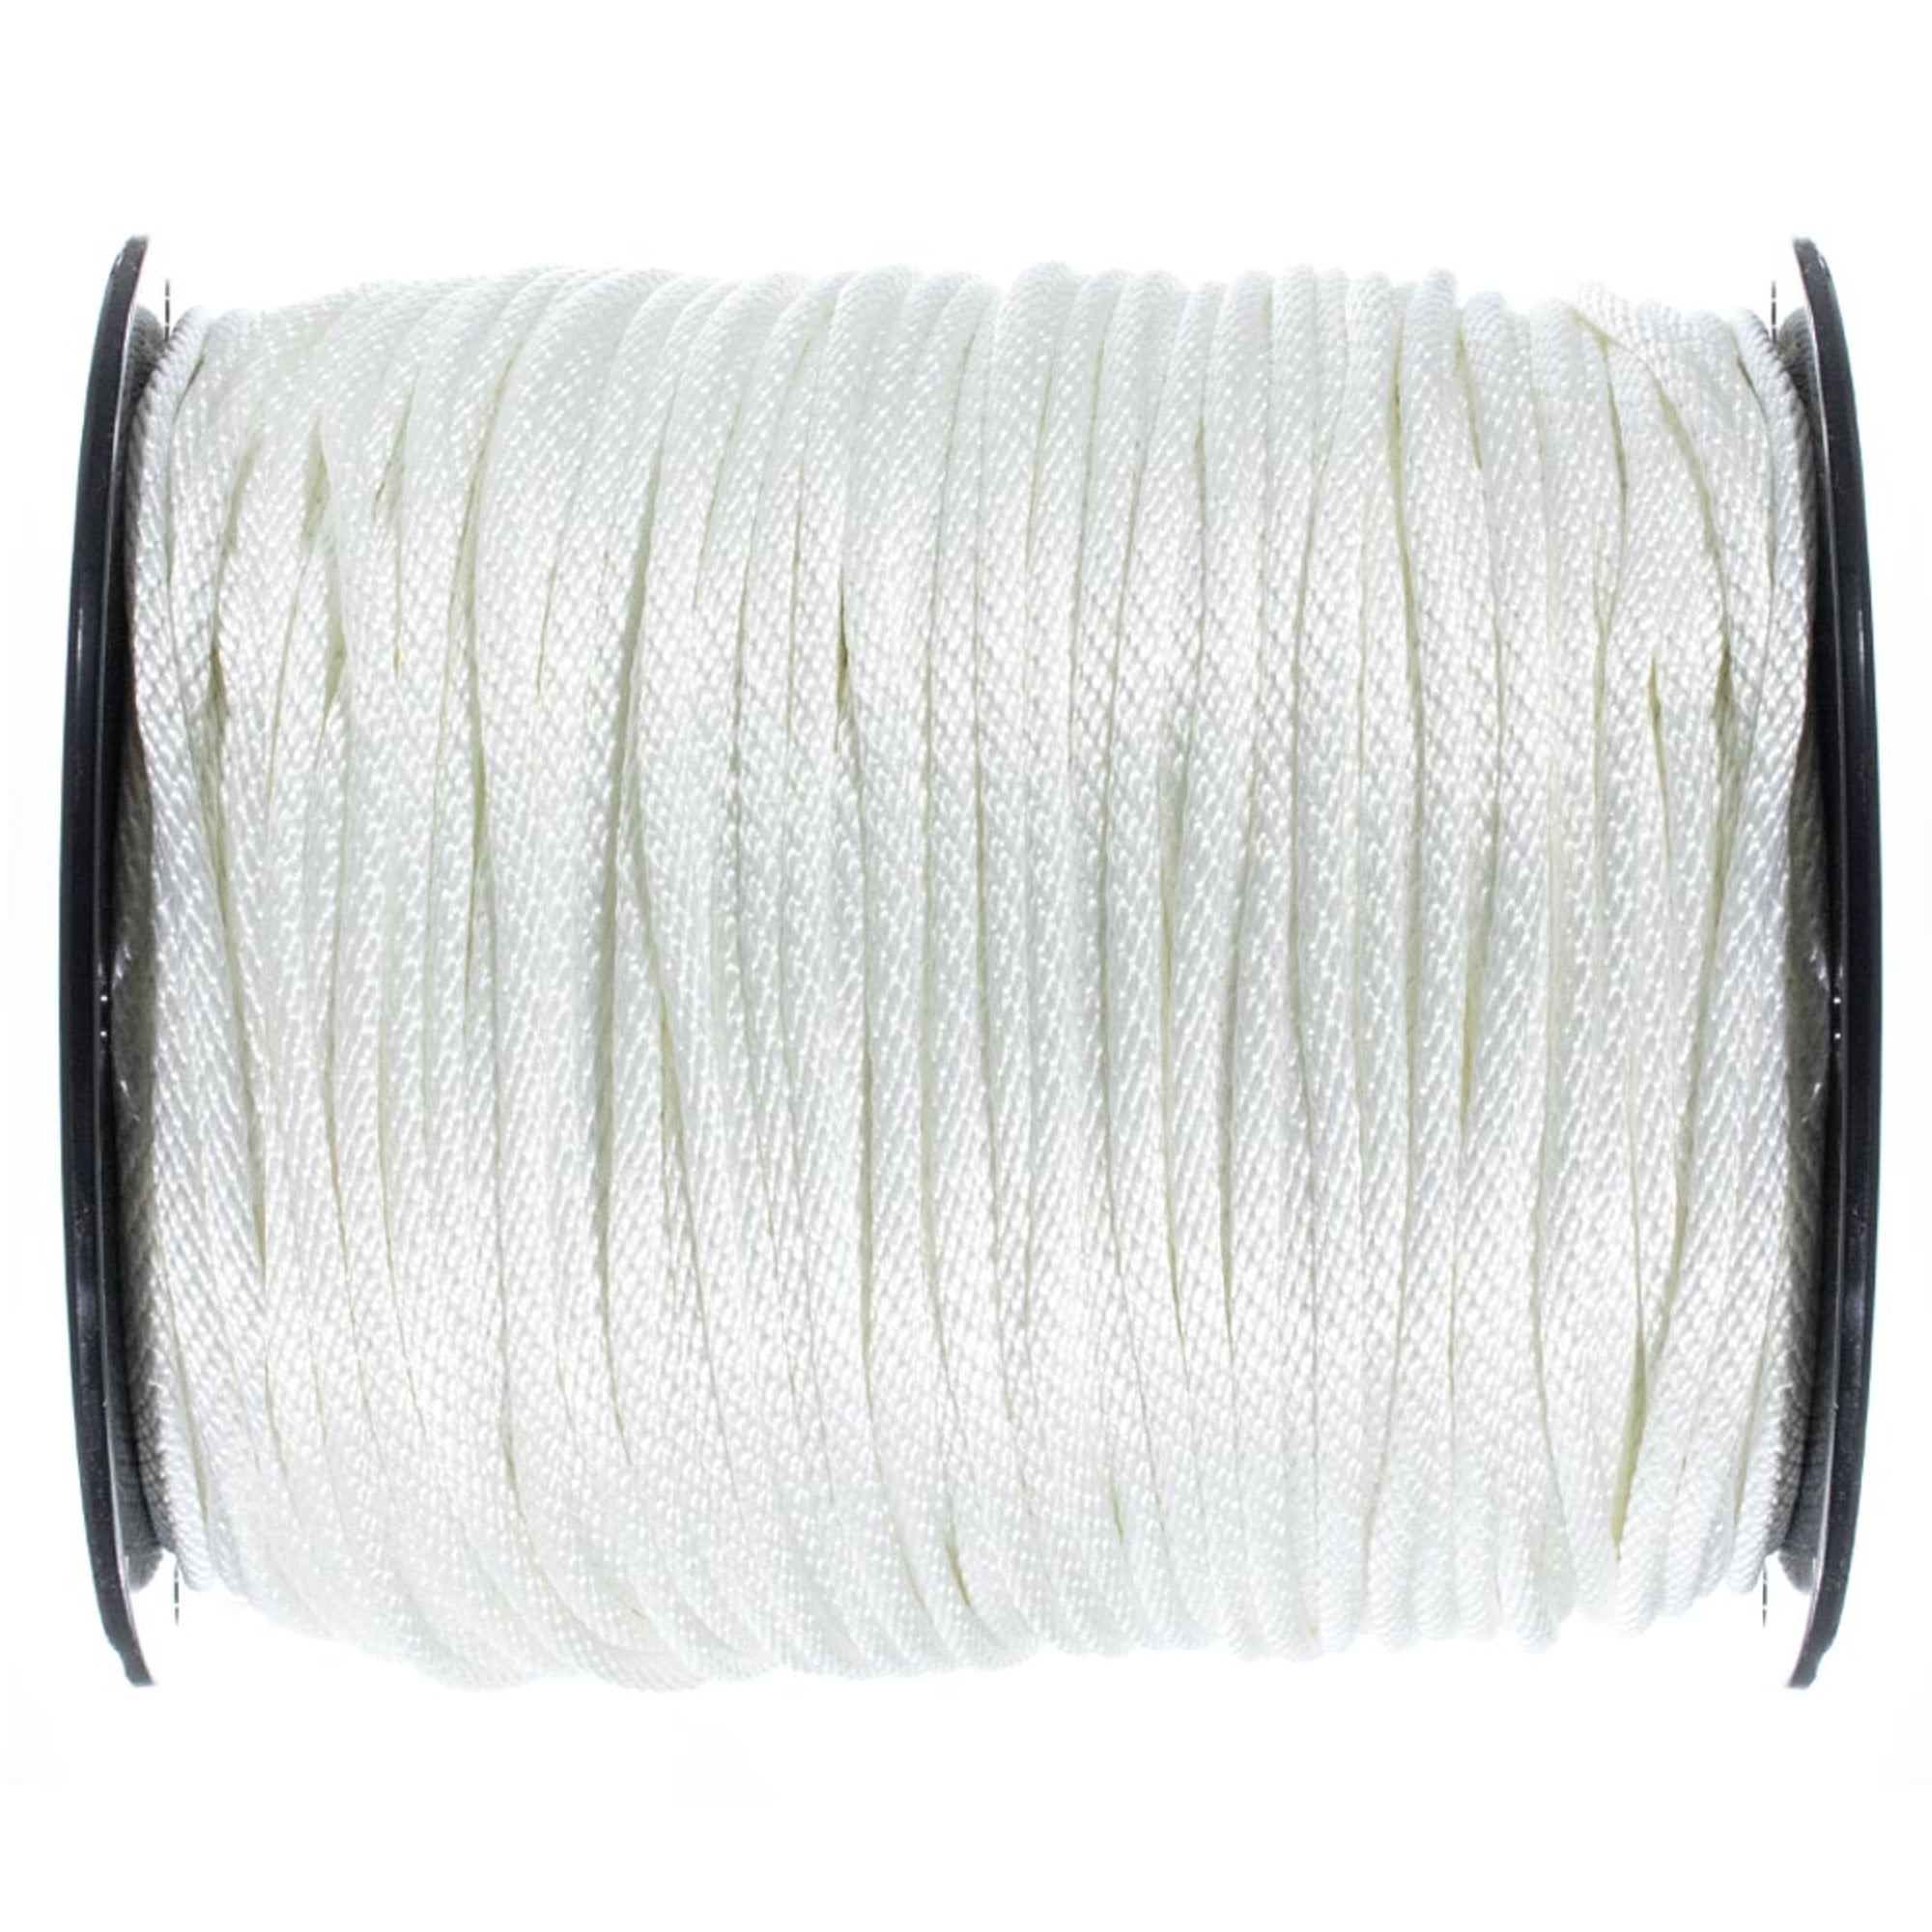 GOLBERG Twisted 100% Natural Cotton Rope - White Cotton Rope - (3/8 Inch x  100 Feet)